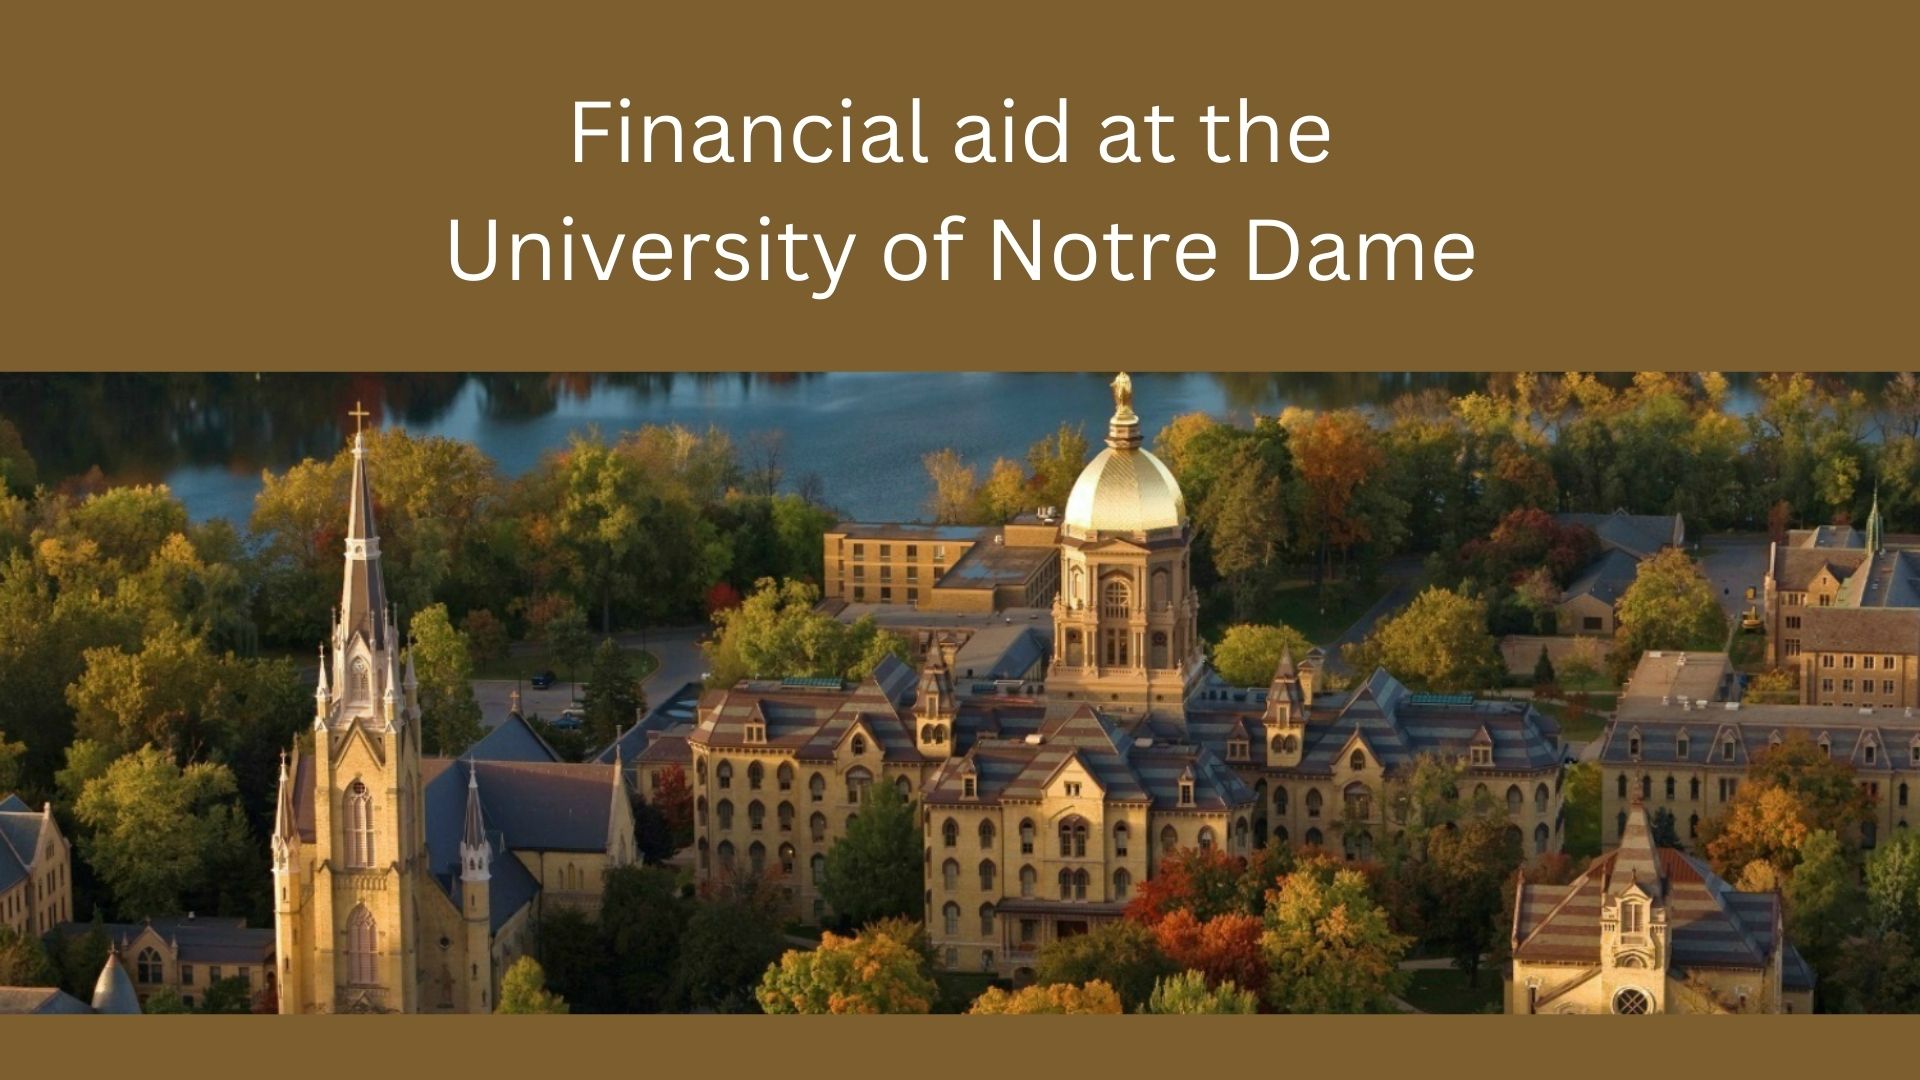 financial aid at the University of Notre Dame